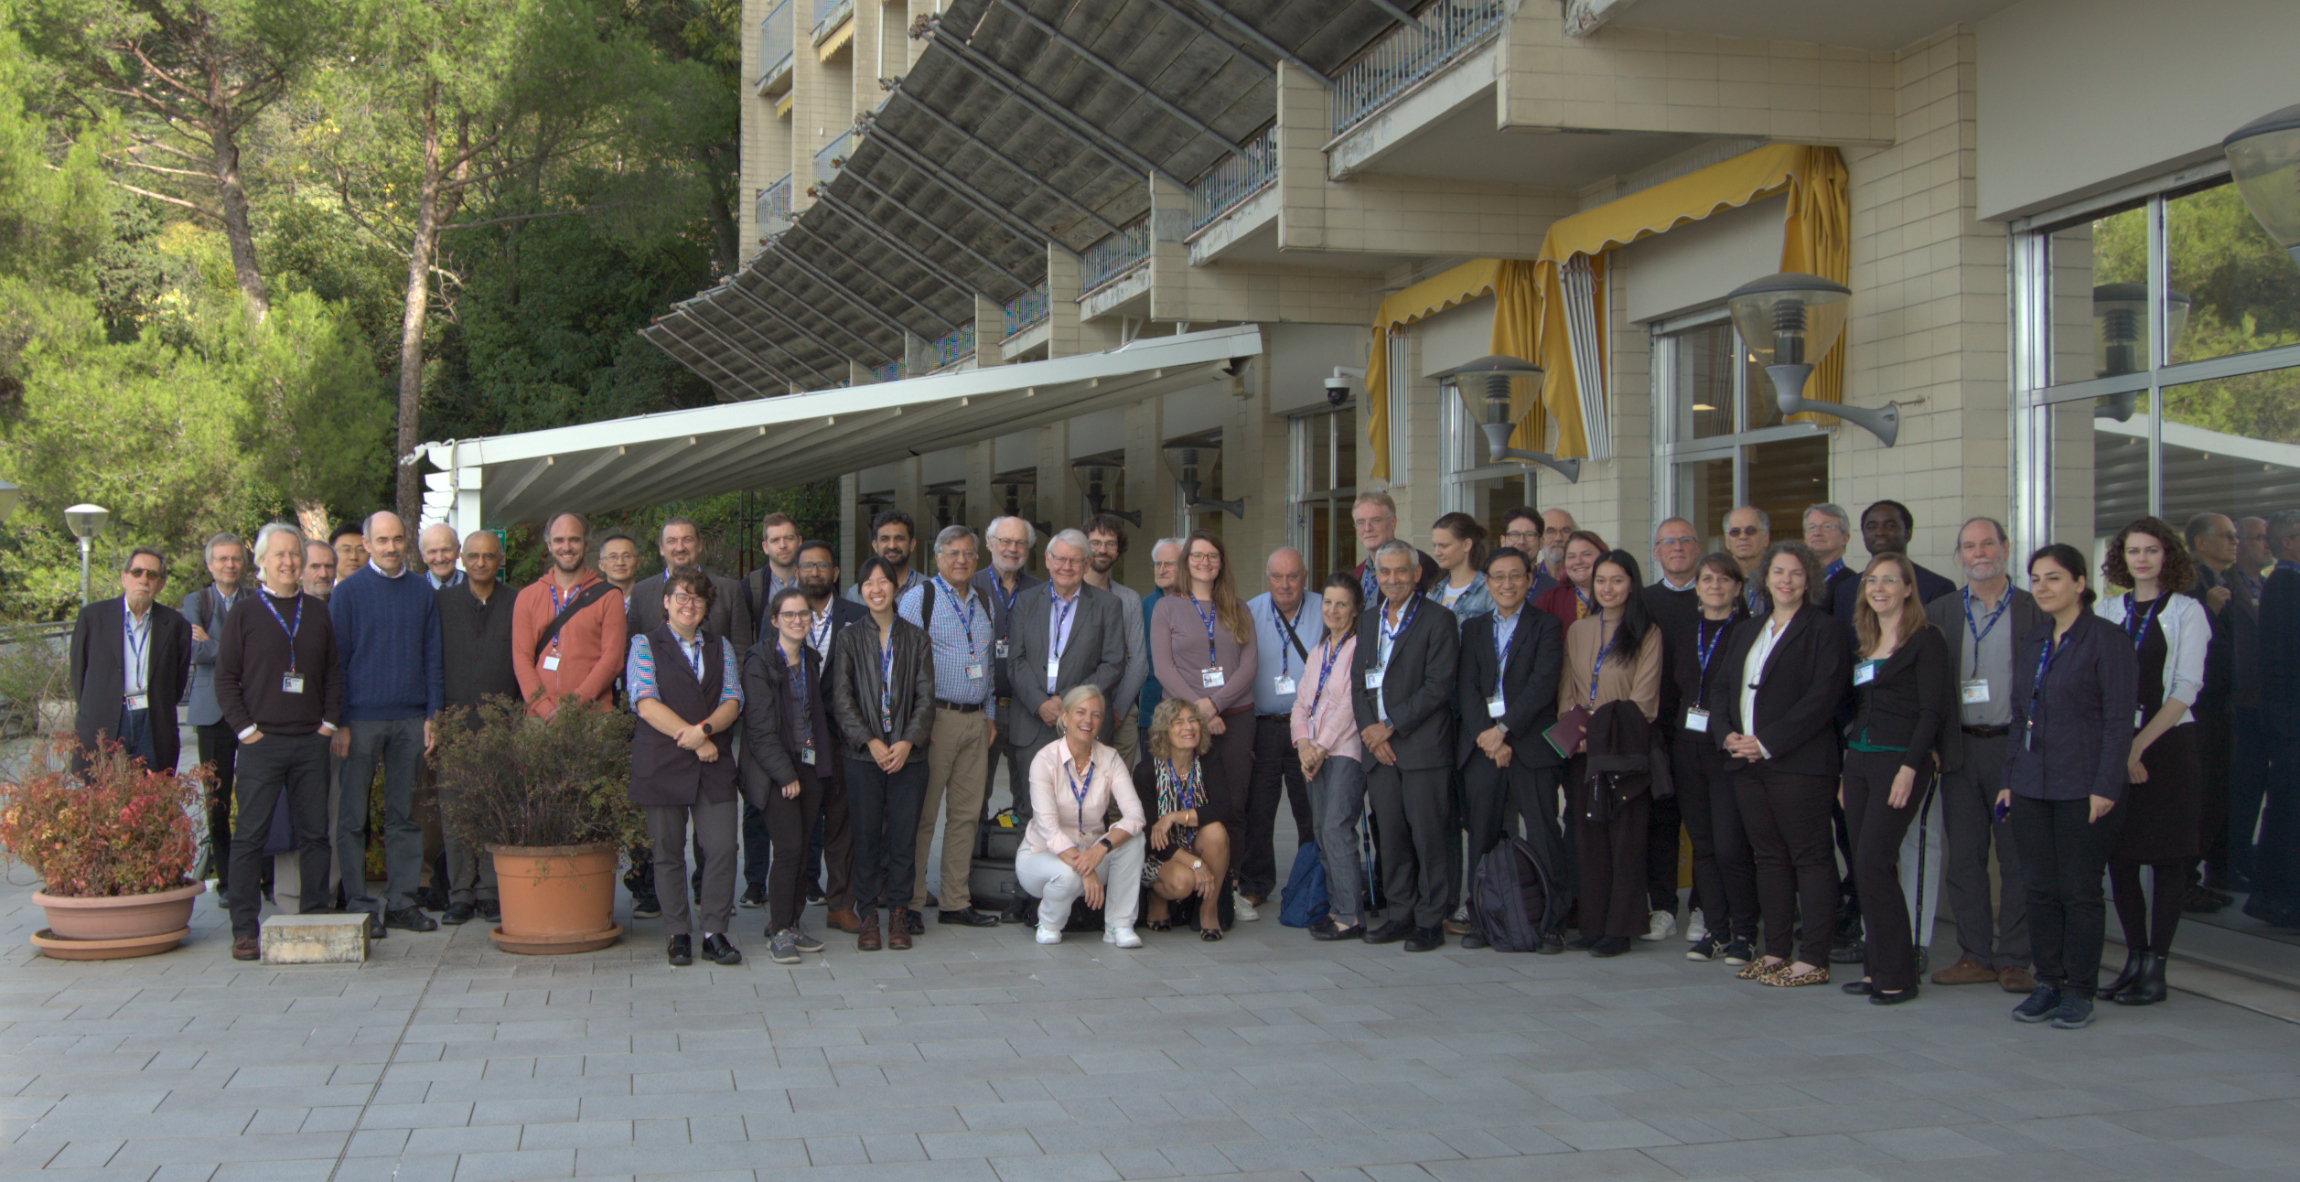 Participants of the workshop "Increasing Danger of Nuclear Weapons: How Physicists Can Help Reduce the Threat" in Grignano, Trieste (Italy), October 22-25, 2023.